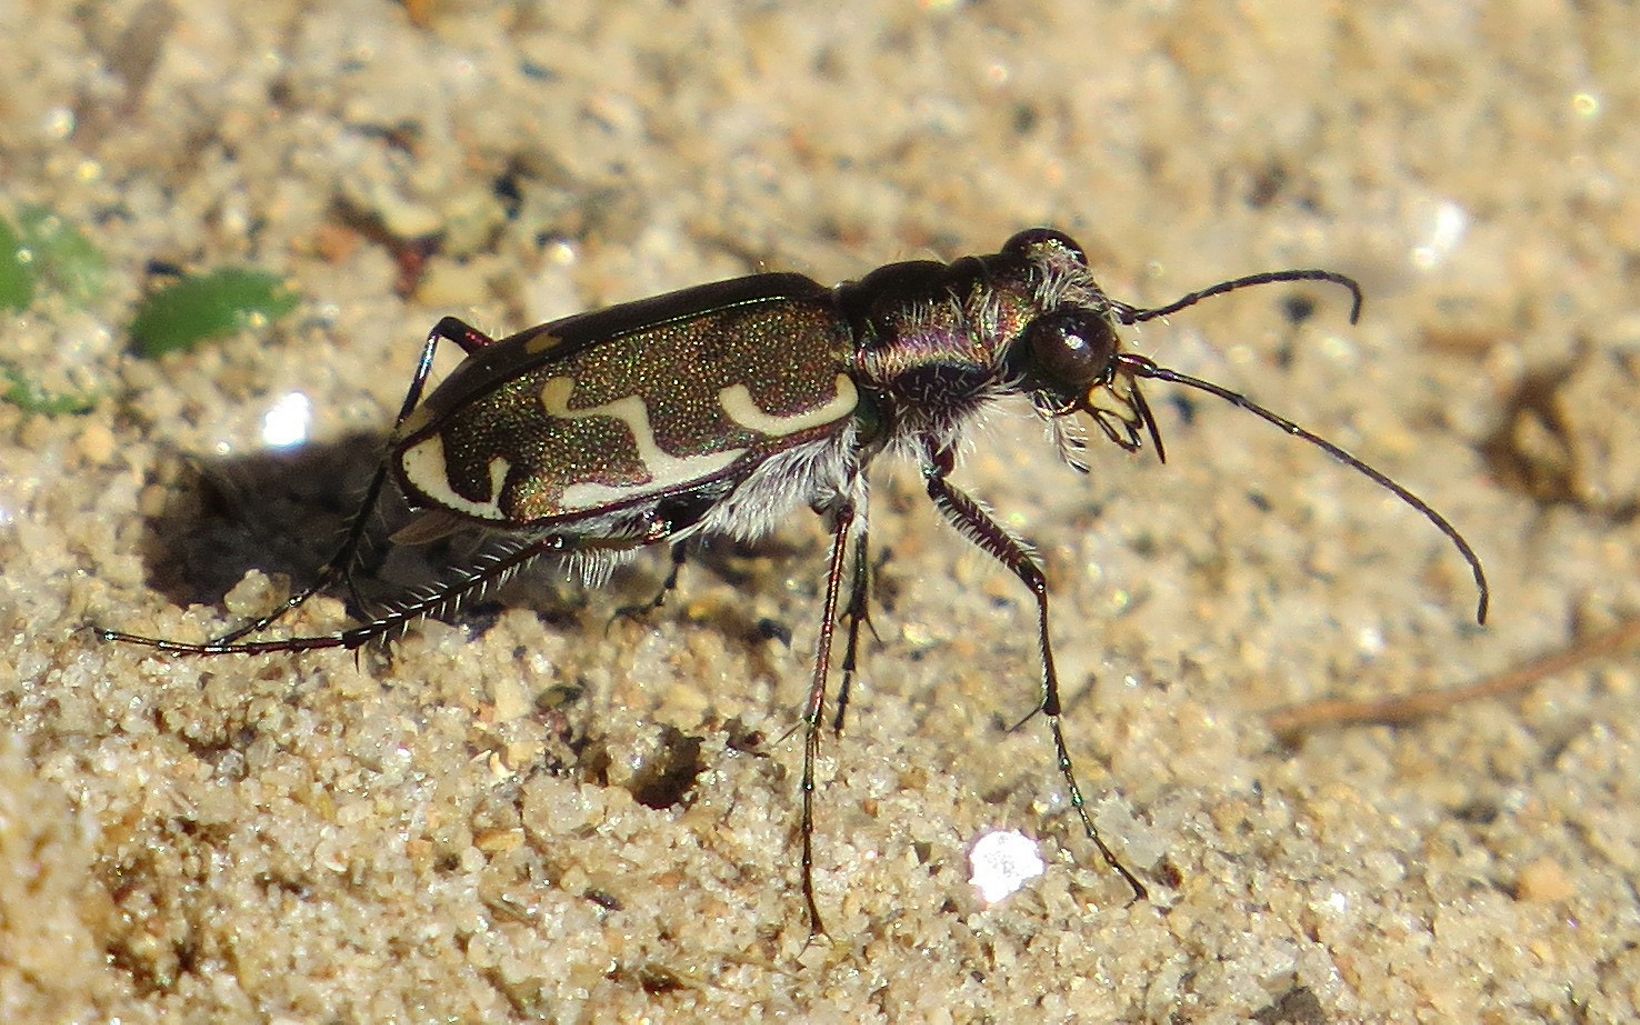 A brown, slightly iridescent beetle.